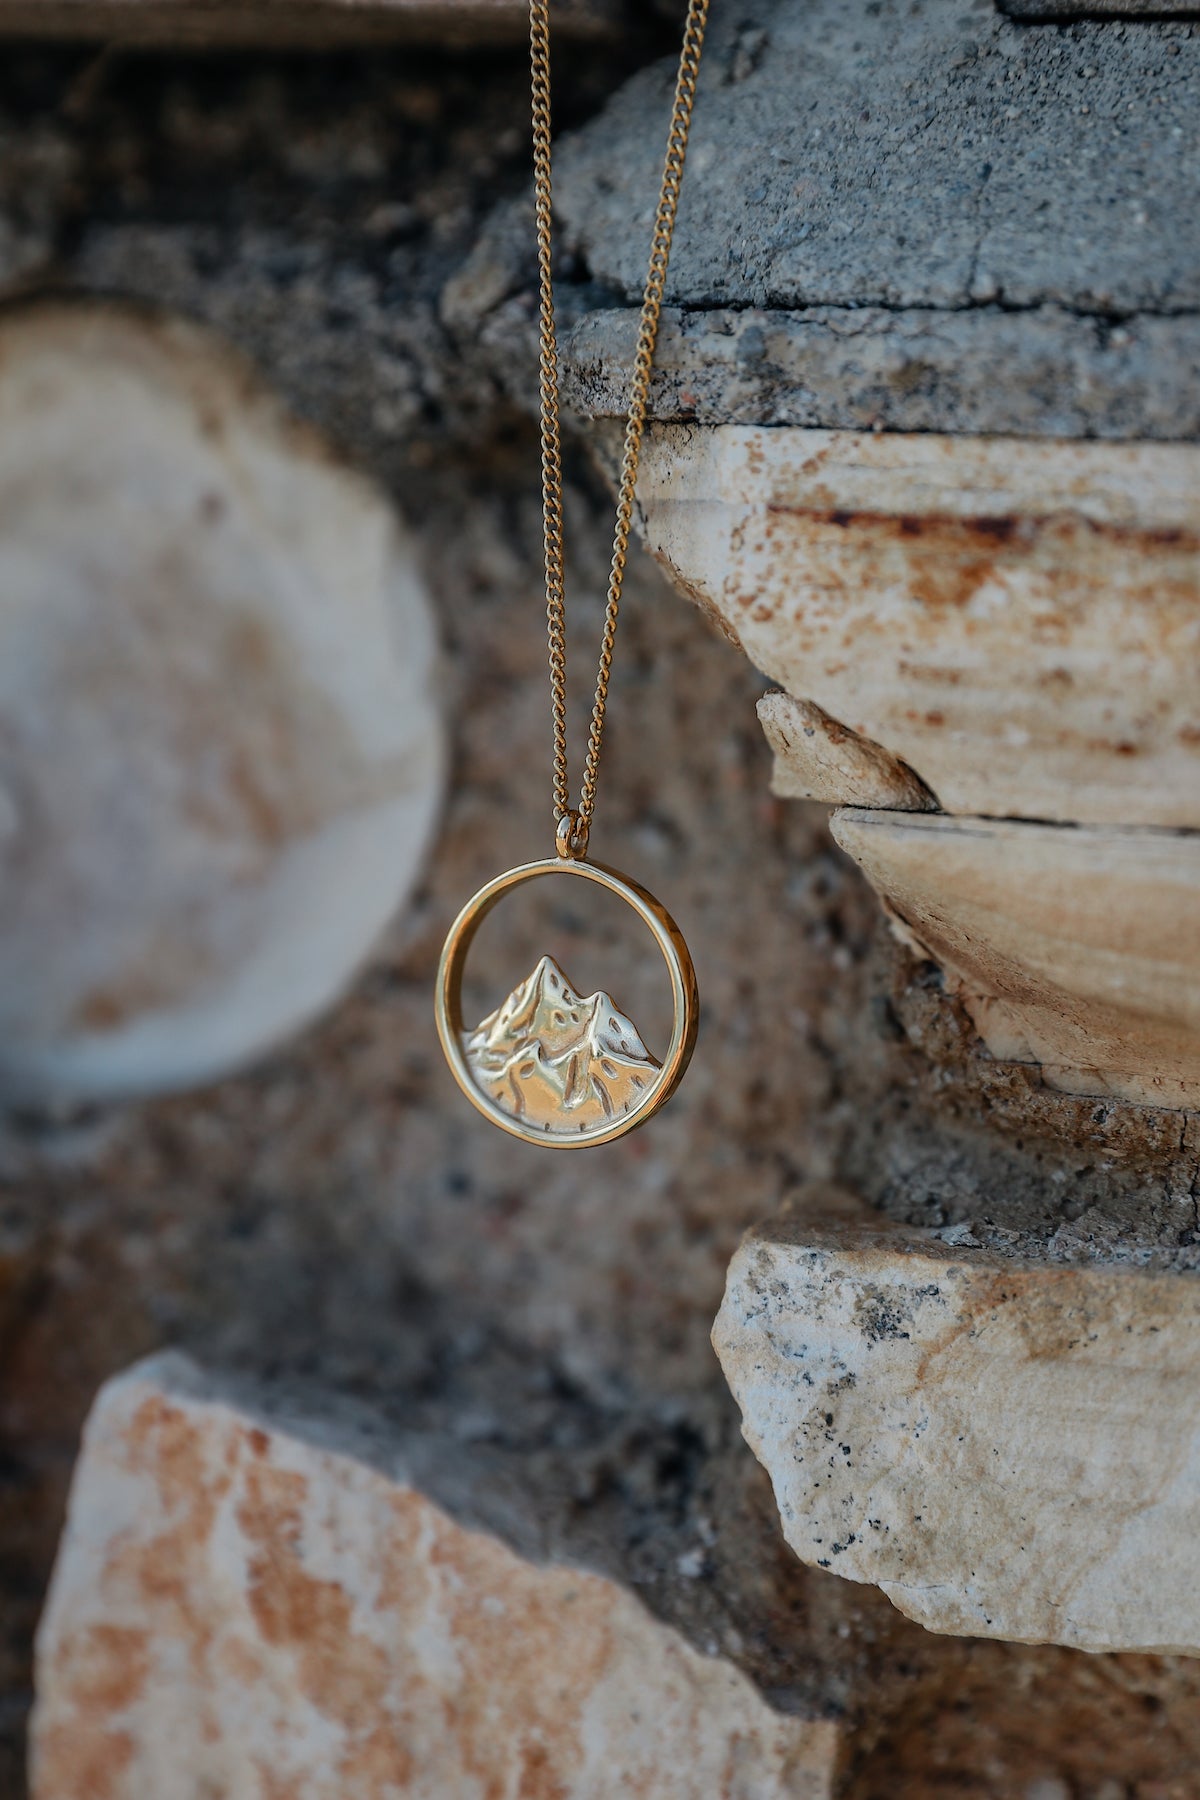 Breaking point necklace hanging from a stone backdrop